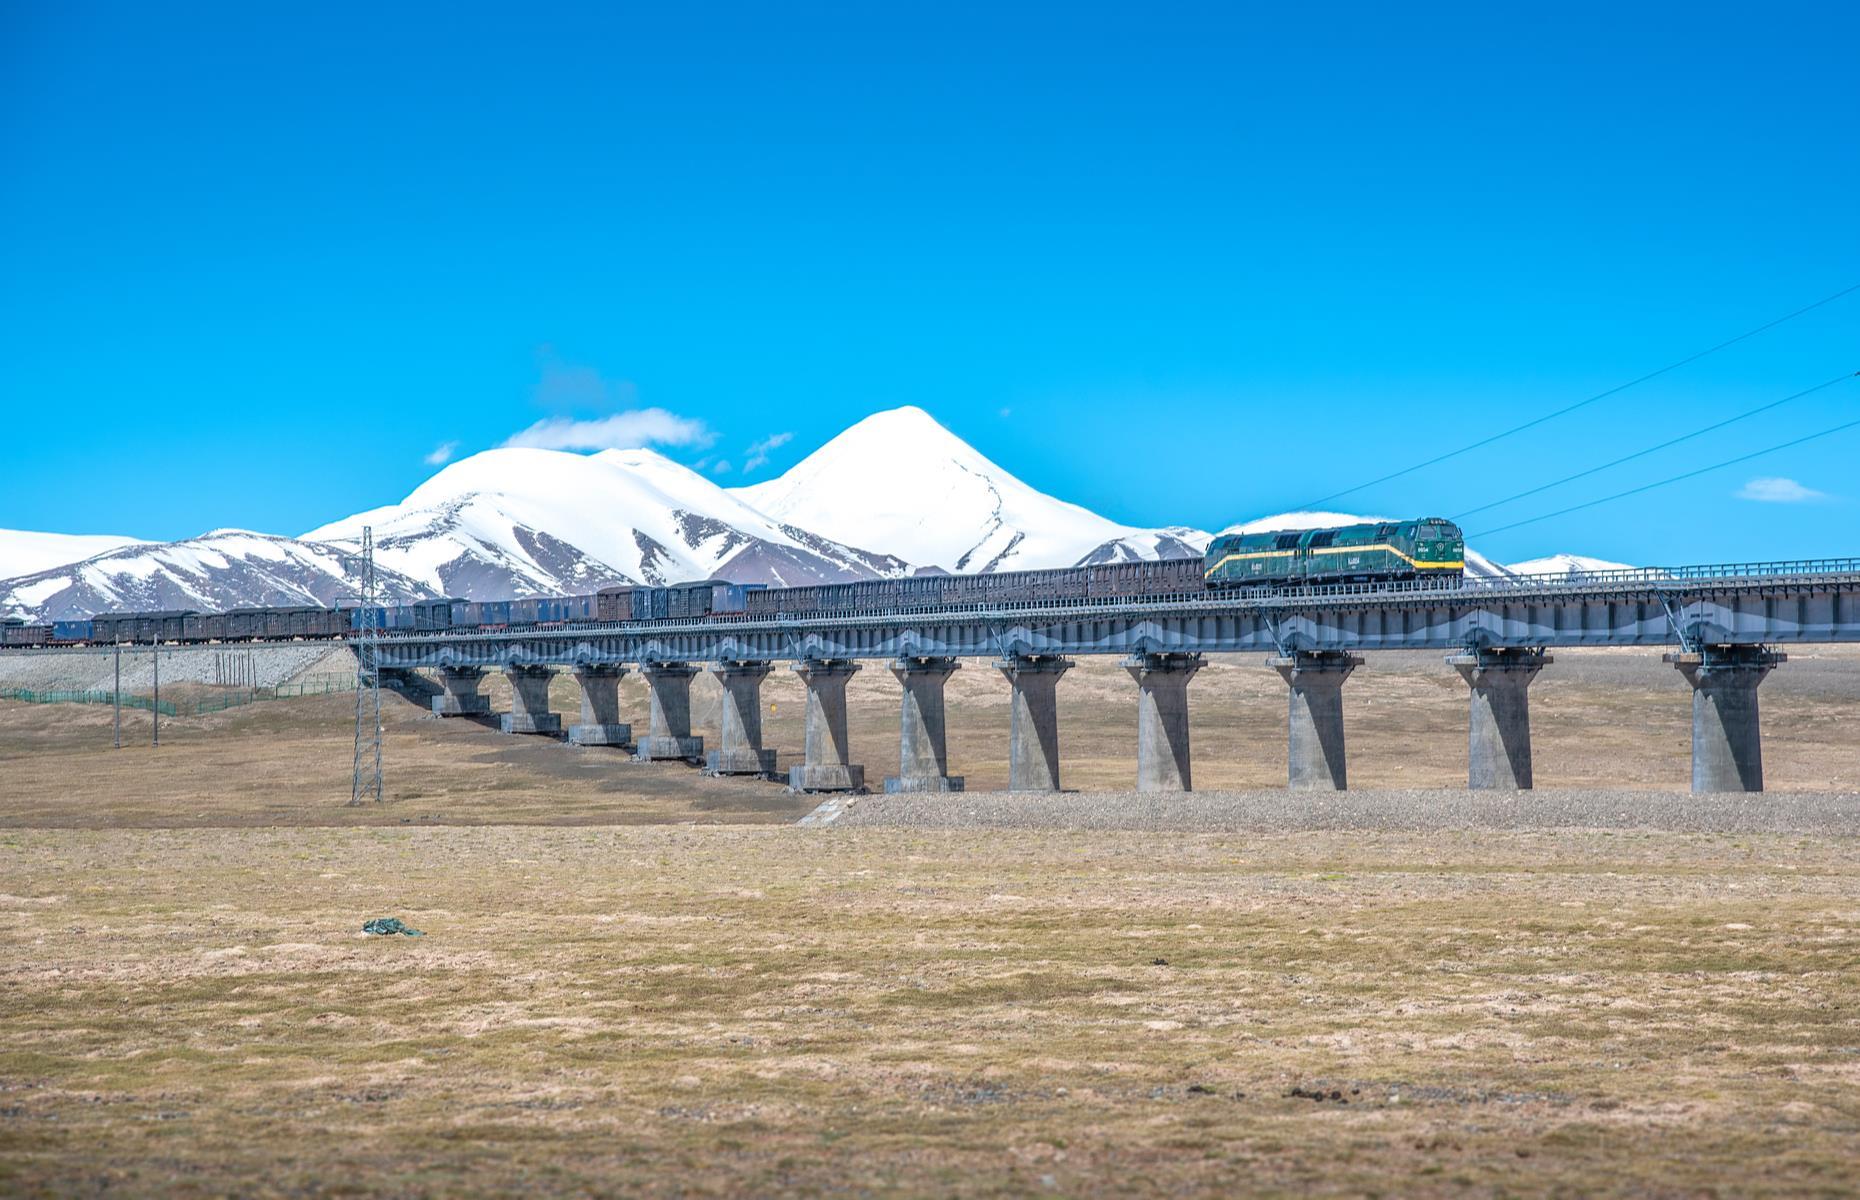 <p>The highest passenger railway journey in the world, the Qinghai-Tibet line began in 2006, connecting Xining, capital of Qinghai province, with Lhasa, capital of Tibet. A staggering 596 miles (960km) of the track sits at 13,123 feet (4,000m) above sea level and it reaches 17,162 feet (5,231m) at its highest point when it climbs up to the Tanggula Pass. As the trains roll across frozen landscape and up into the Tibetan plateau, passengers are protected from the effects of altitude by oxygen that's pumped into the carriages, regulated temperatures and UV-coated windows.</p>